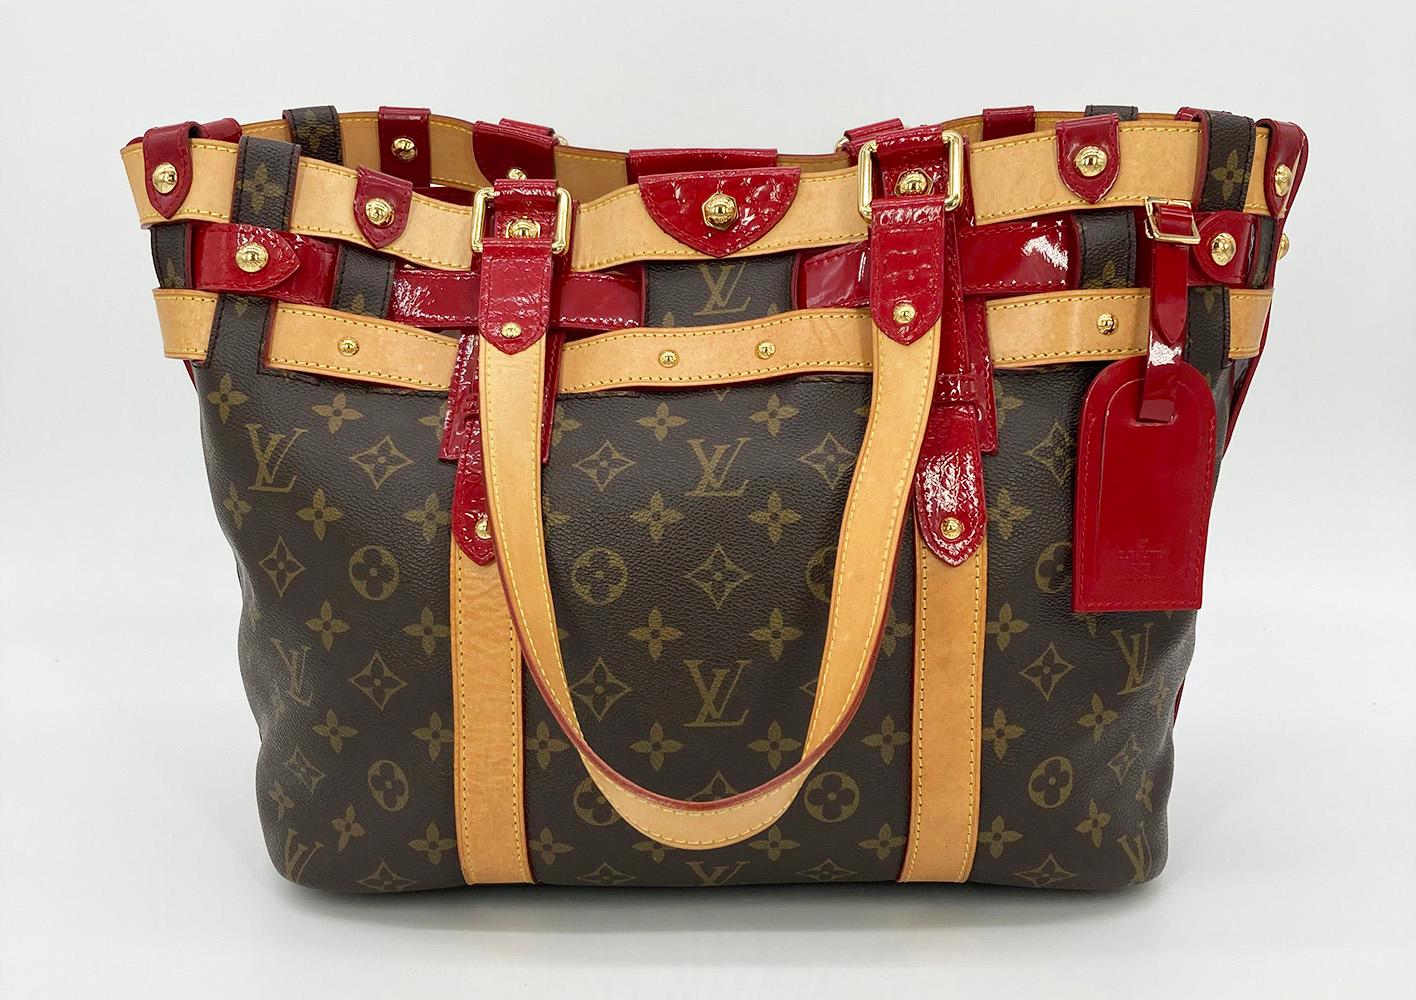 Louis Vuitton Rubis Salina GM Monogram Tote Bag in very good condition. Signature brown monogram canvas exterior trimmed with tan vachetta, cherry red patent, and red alligator leathers in a unique basket style design with gold hardware trim. Red